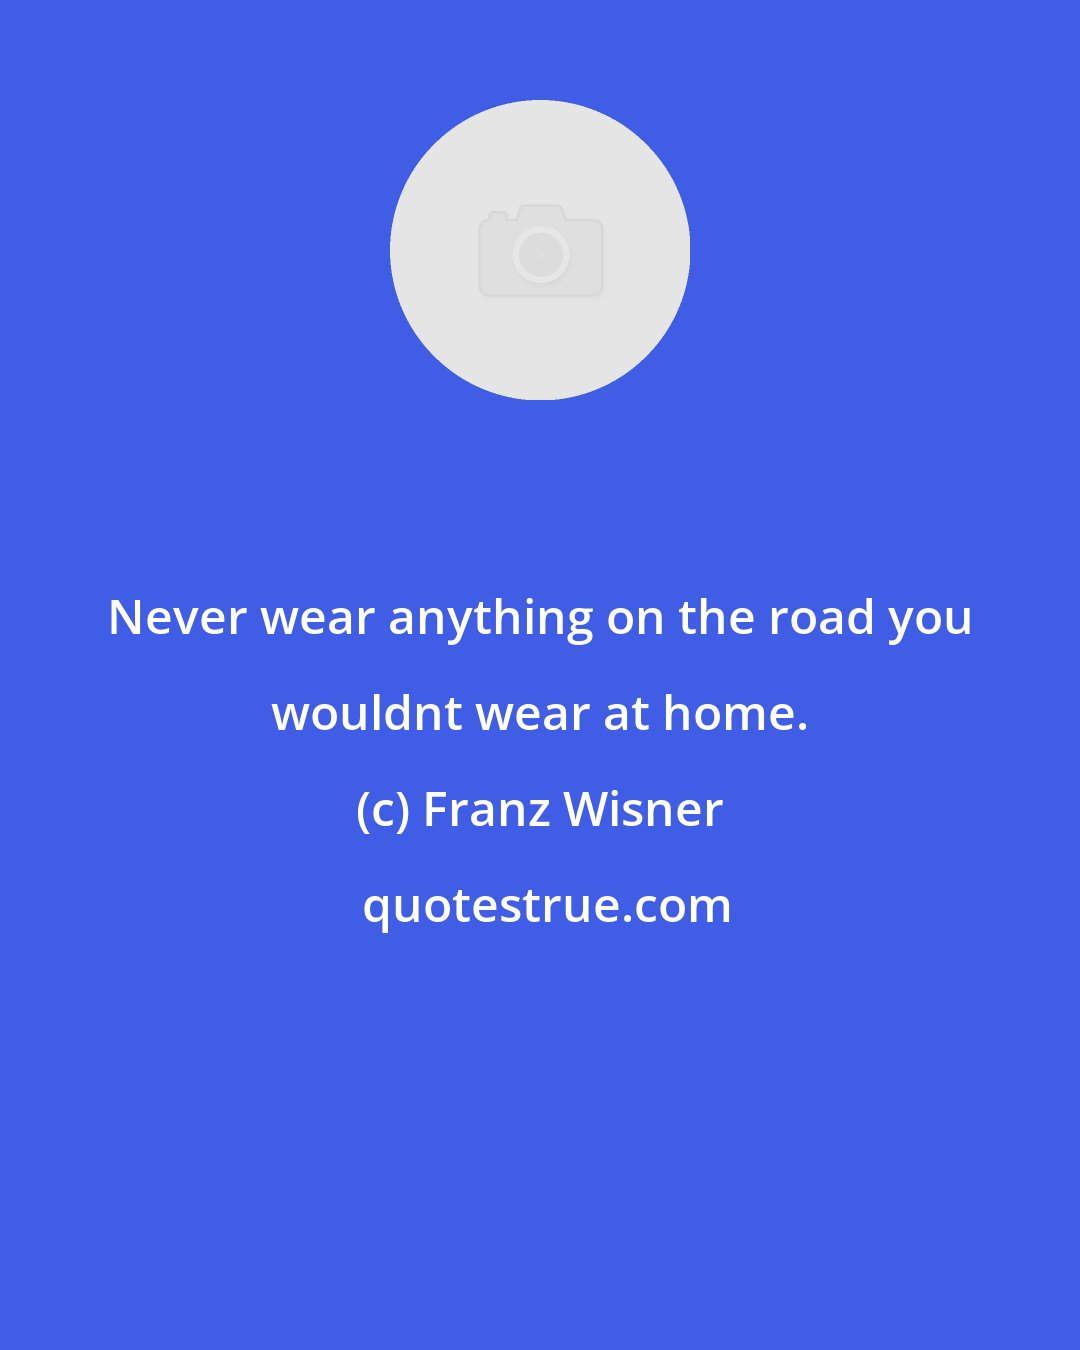 Franz Wisner: Never wear anything on the road you wouldnt wear at home.